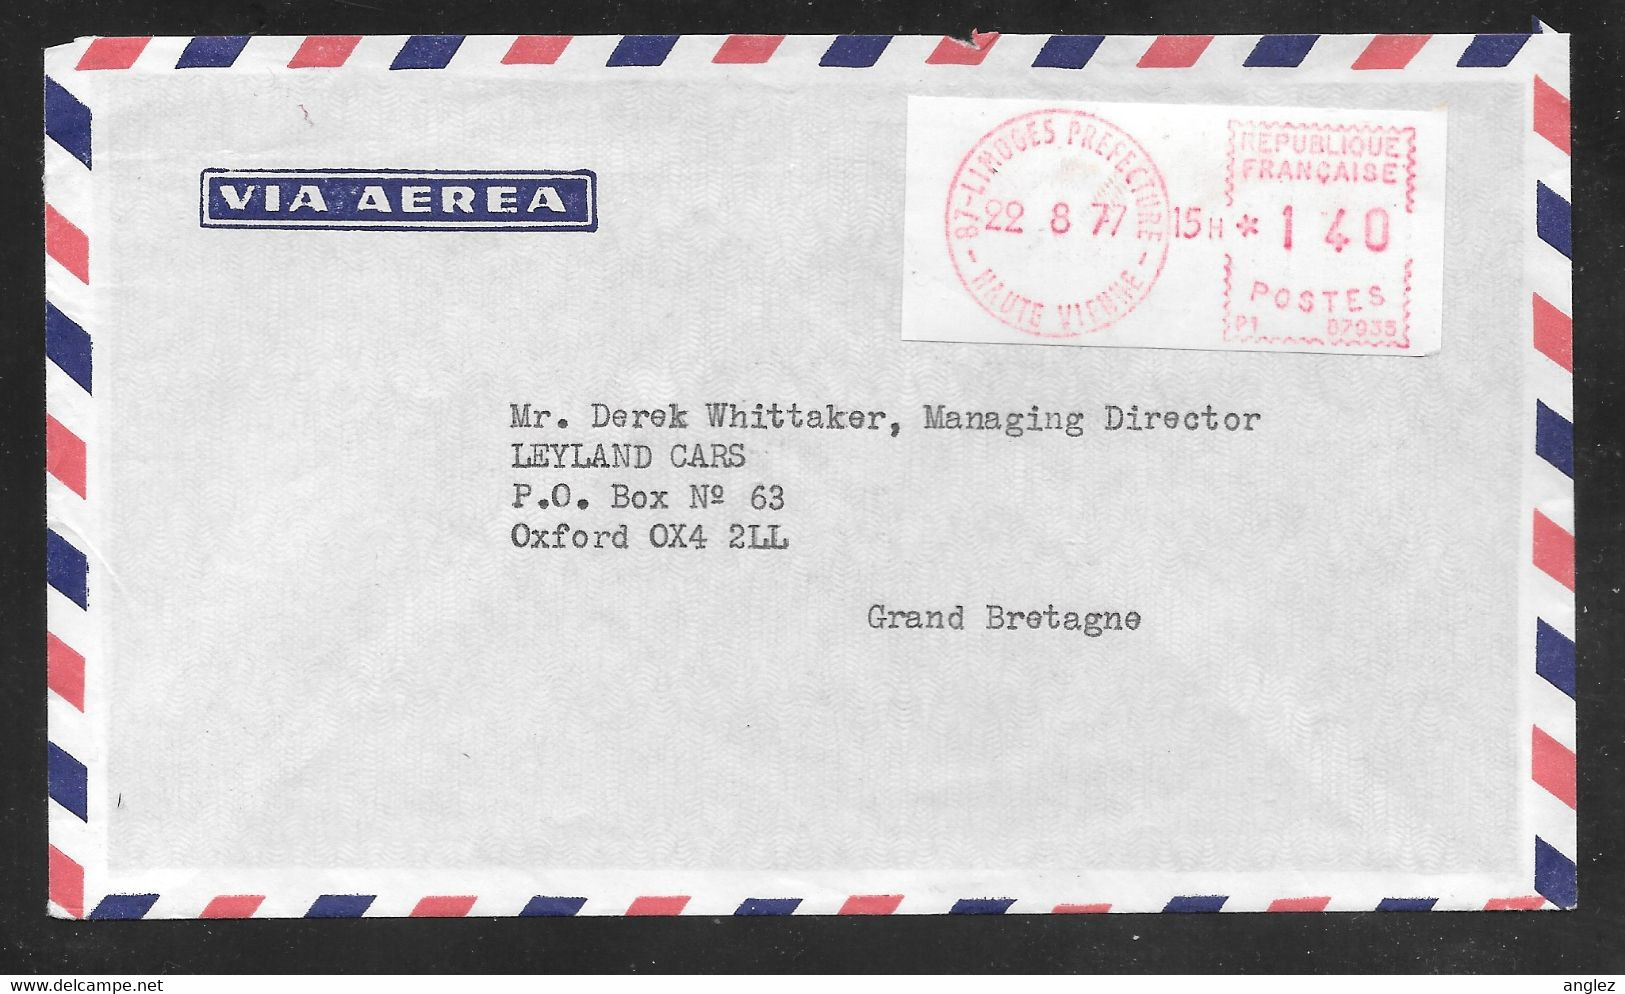 France - 1977 Airmail Cover - Limoges To England - Franking Label - 1969 Montgeron – Weißes Papier – Frama/Satas